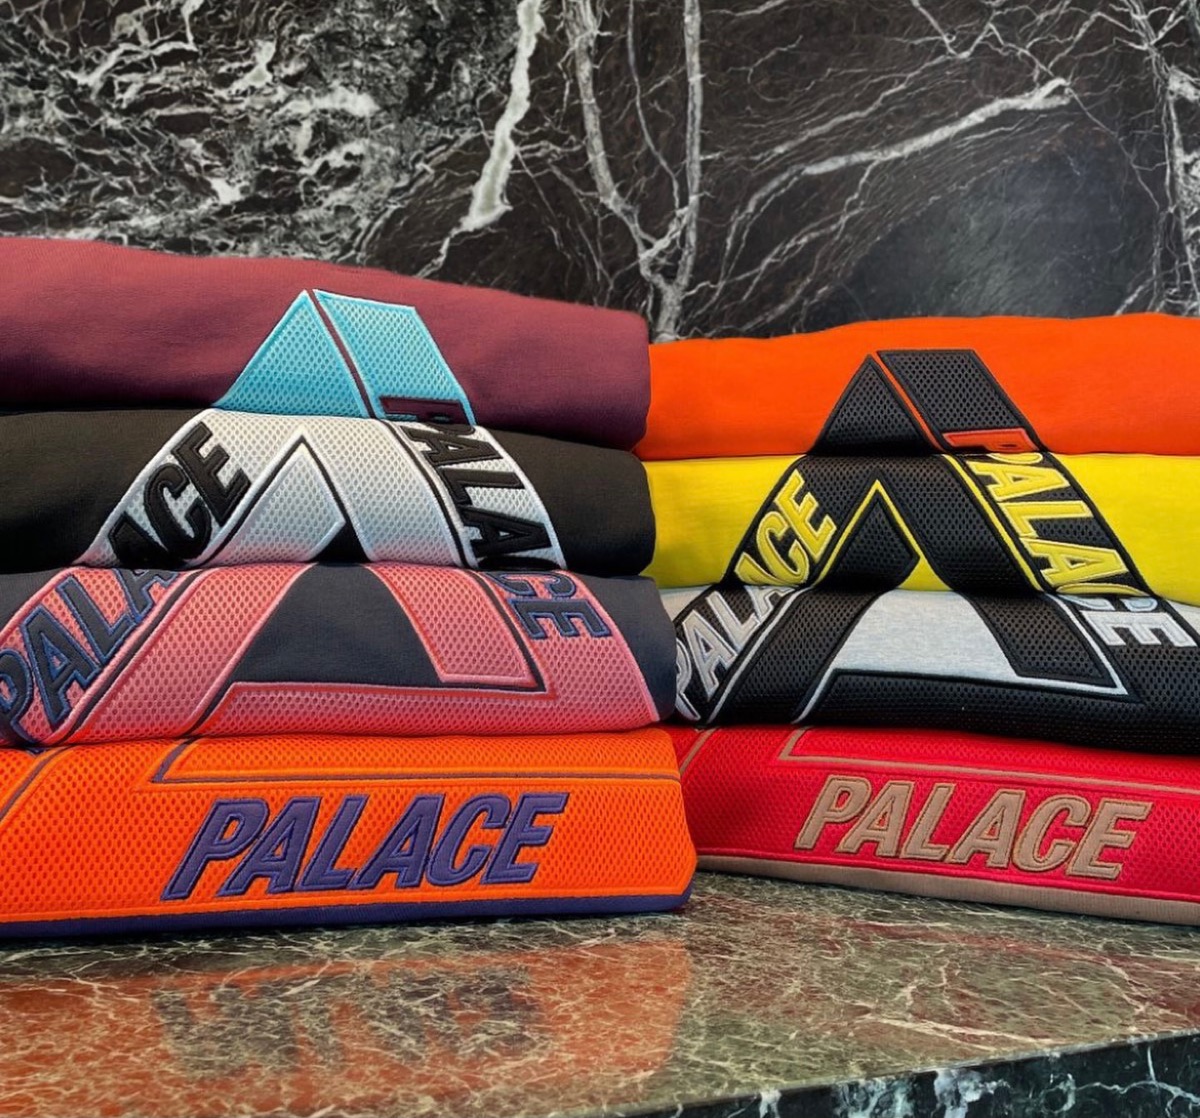 Palace “Summer 2022” Week1が国内5月7日に発売予定 | UP TO DATE